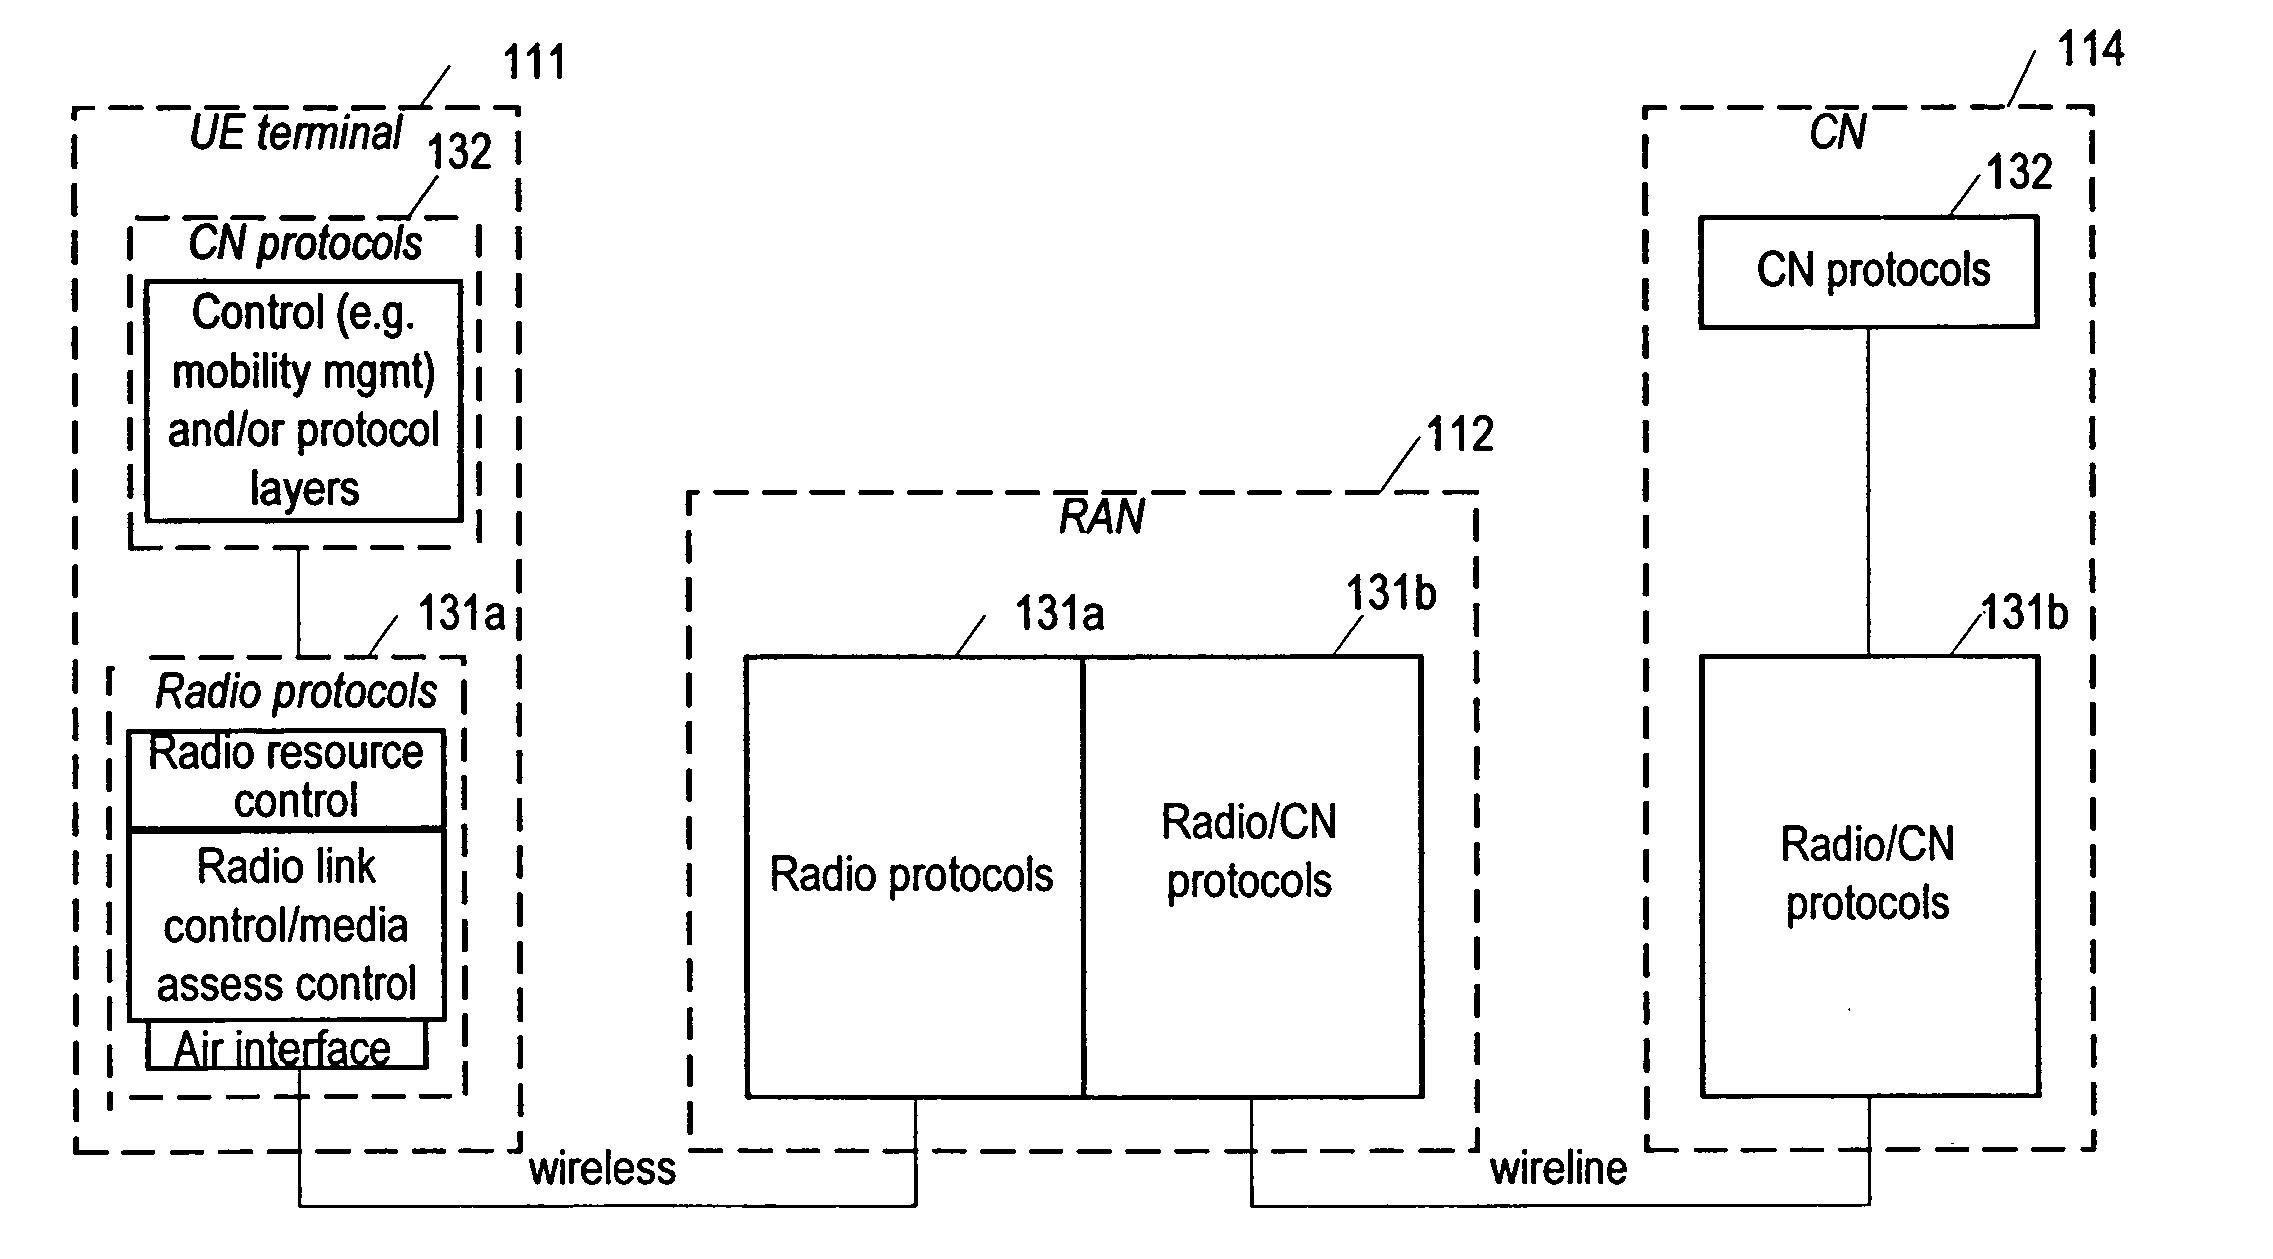 Additional modulation information signaling for high speed downlink packet access